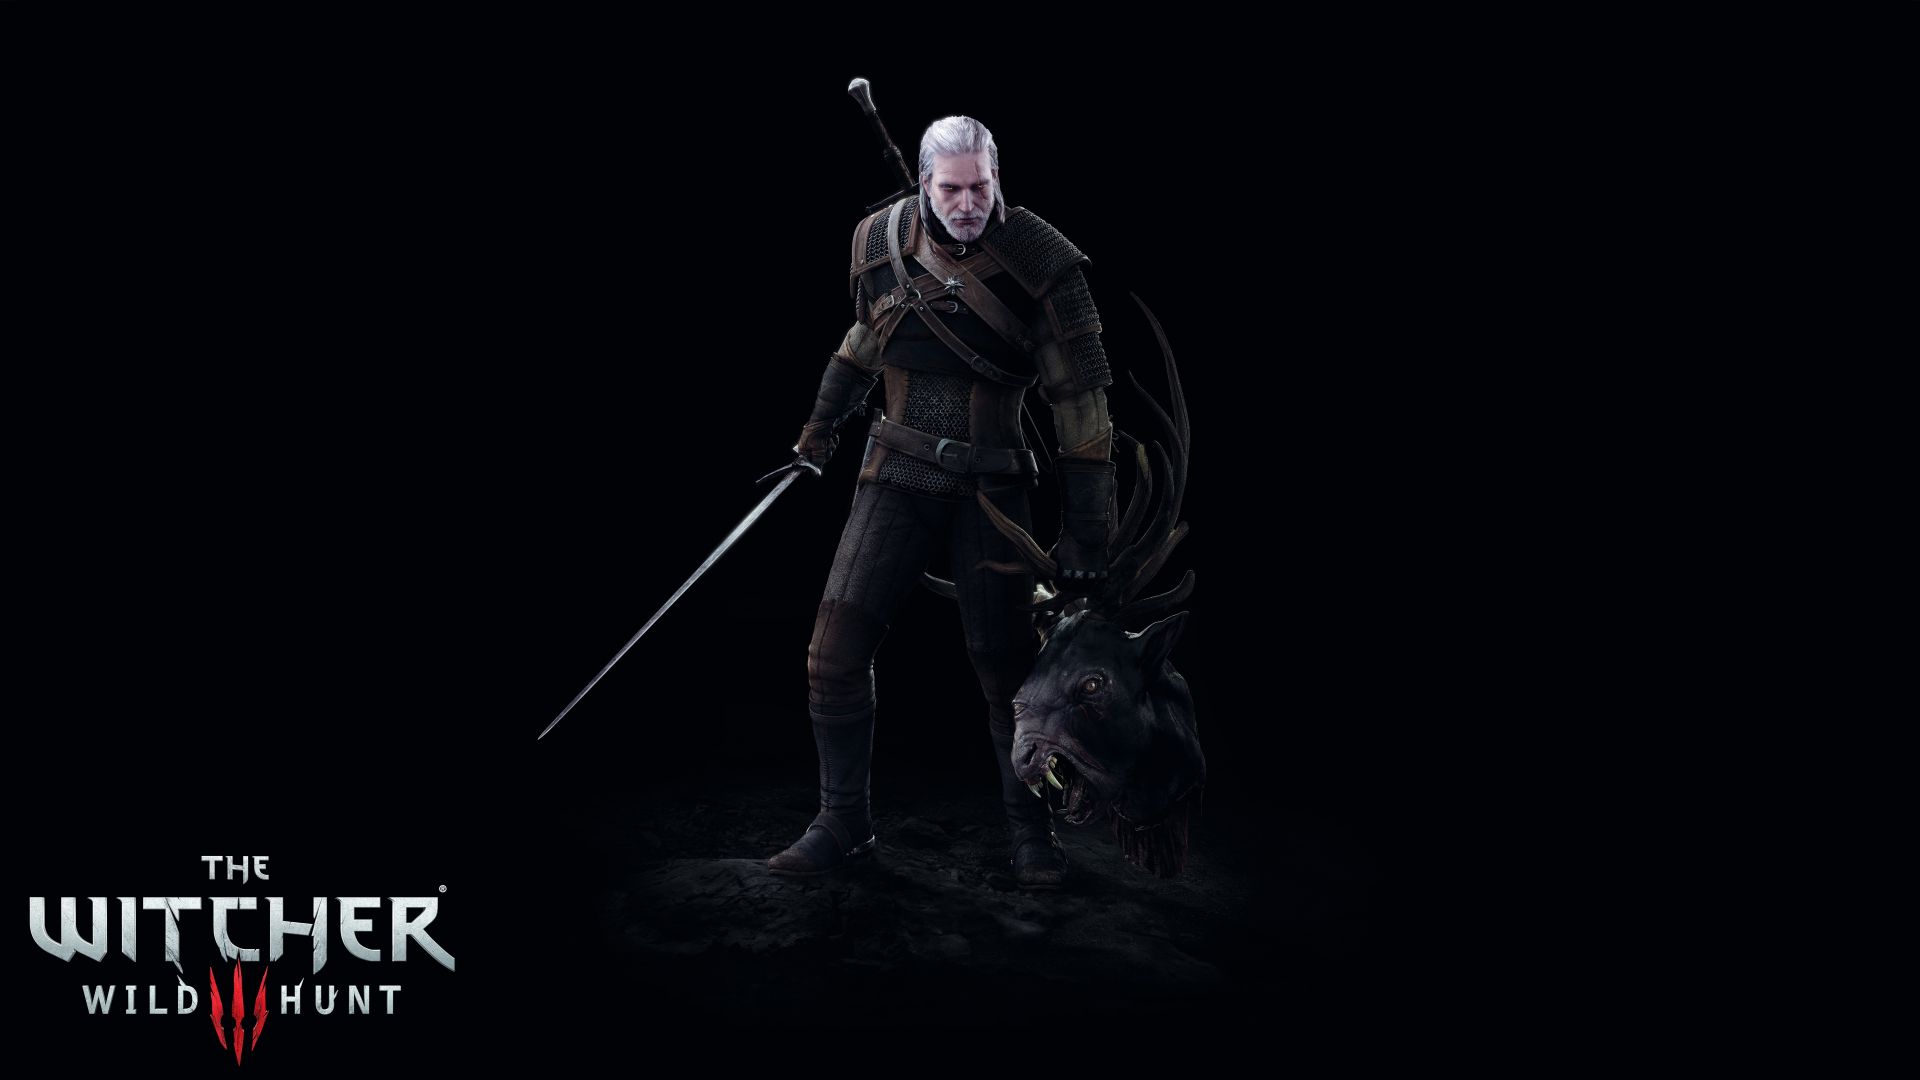 The witcher 3 free download